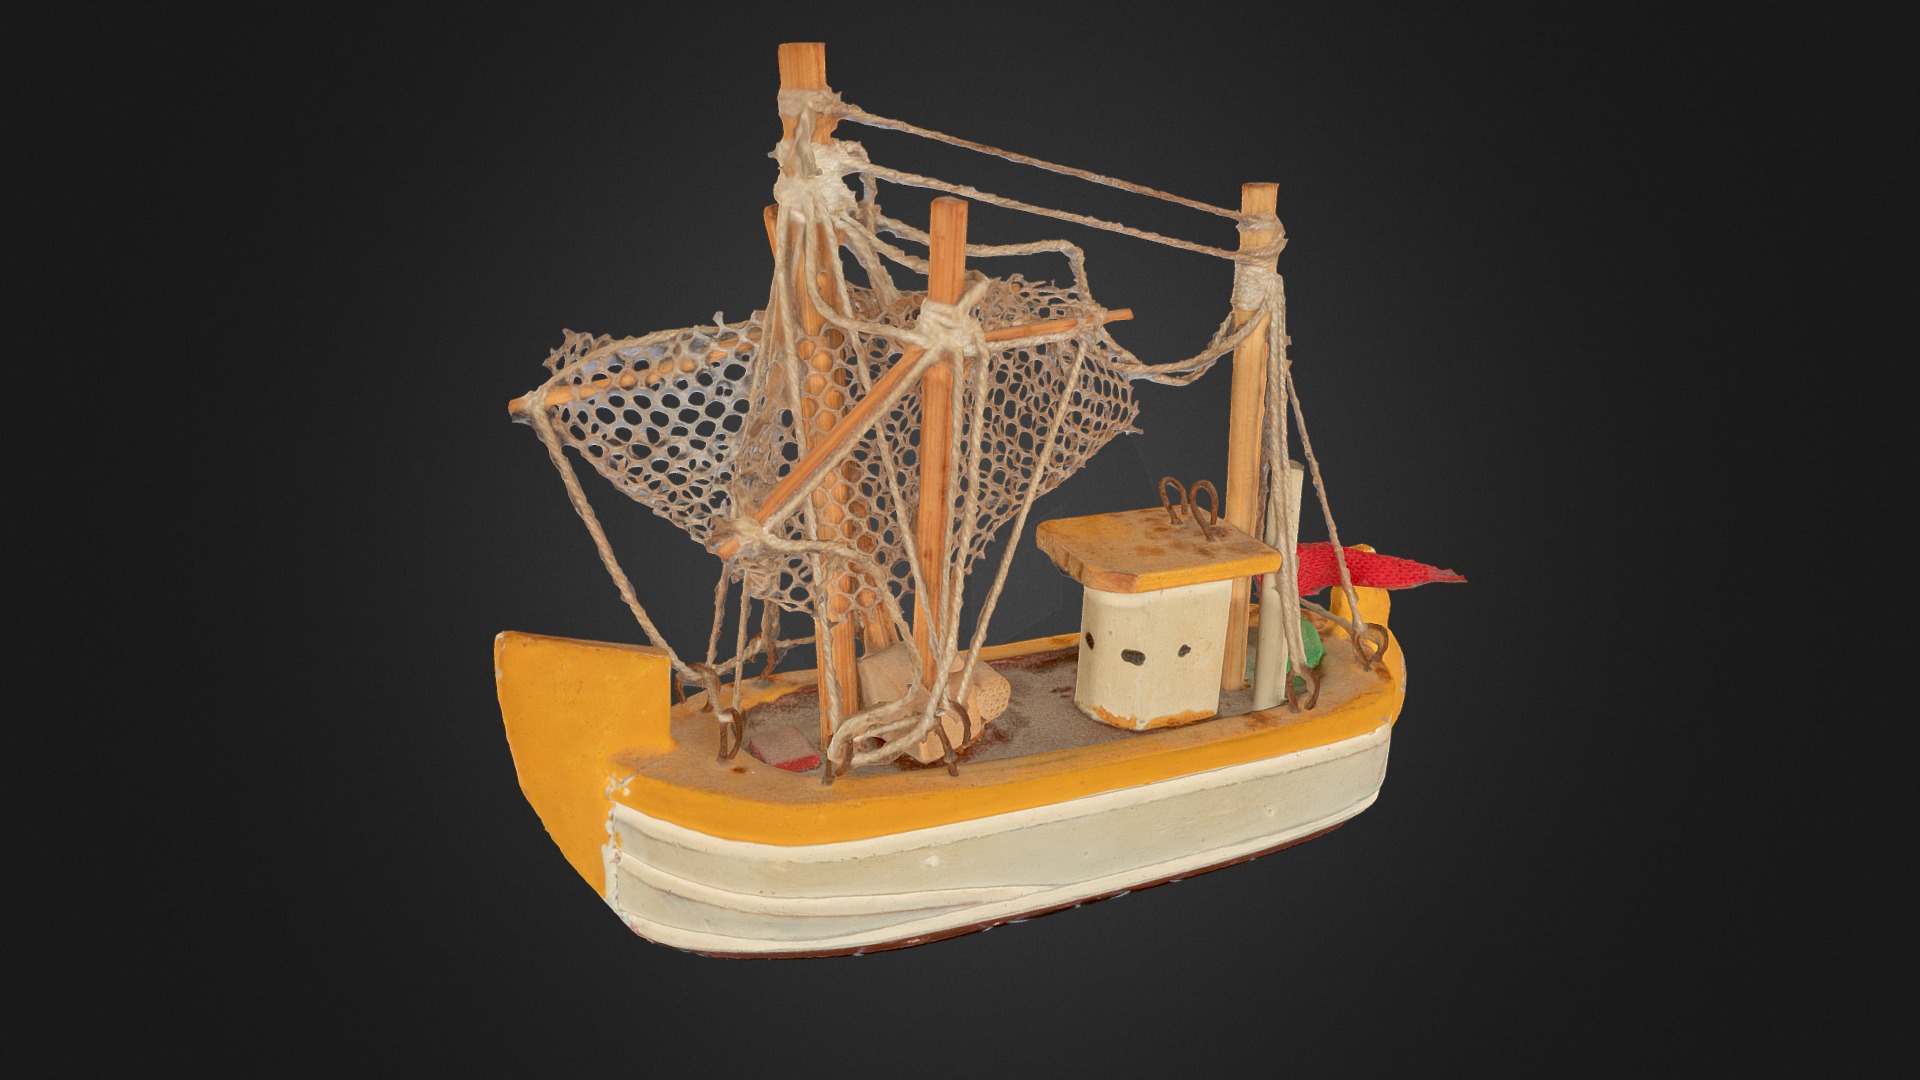 3D model Boat – Handmade (6cm long) - This is a 3D model of the Boat - Handmade (6cm long). The 3D model is about a model of a ship.